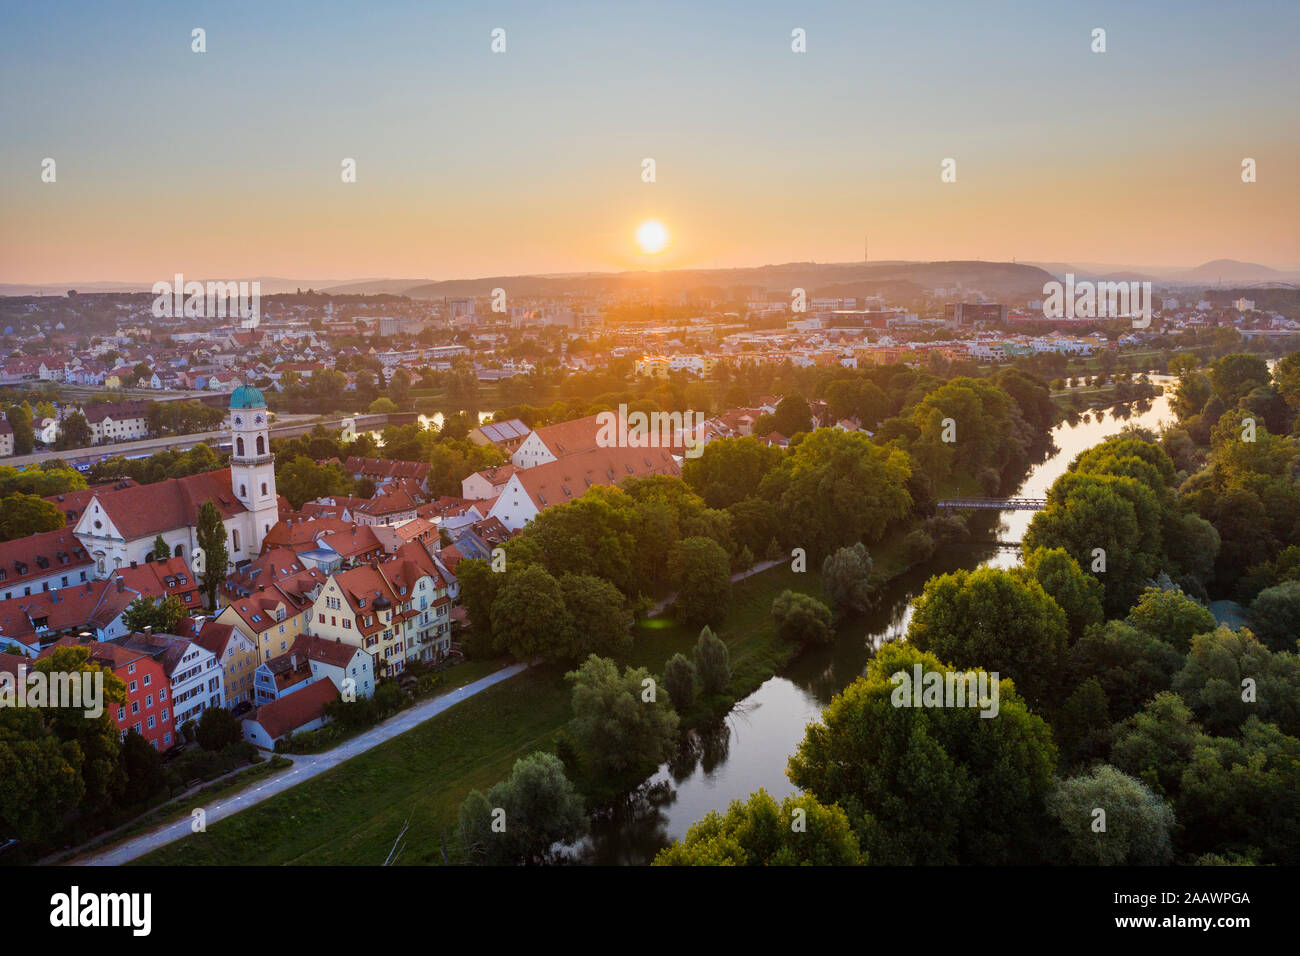 Aerial view of buildings in Stadtamhof against sky during sunrise, Bavaria, Germany Stock Photo